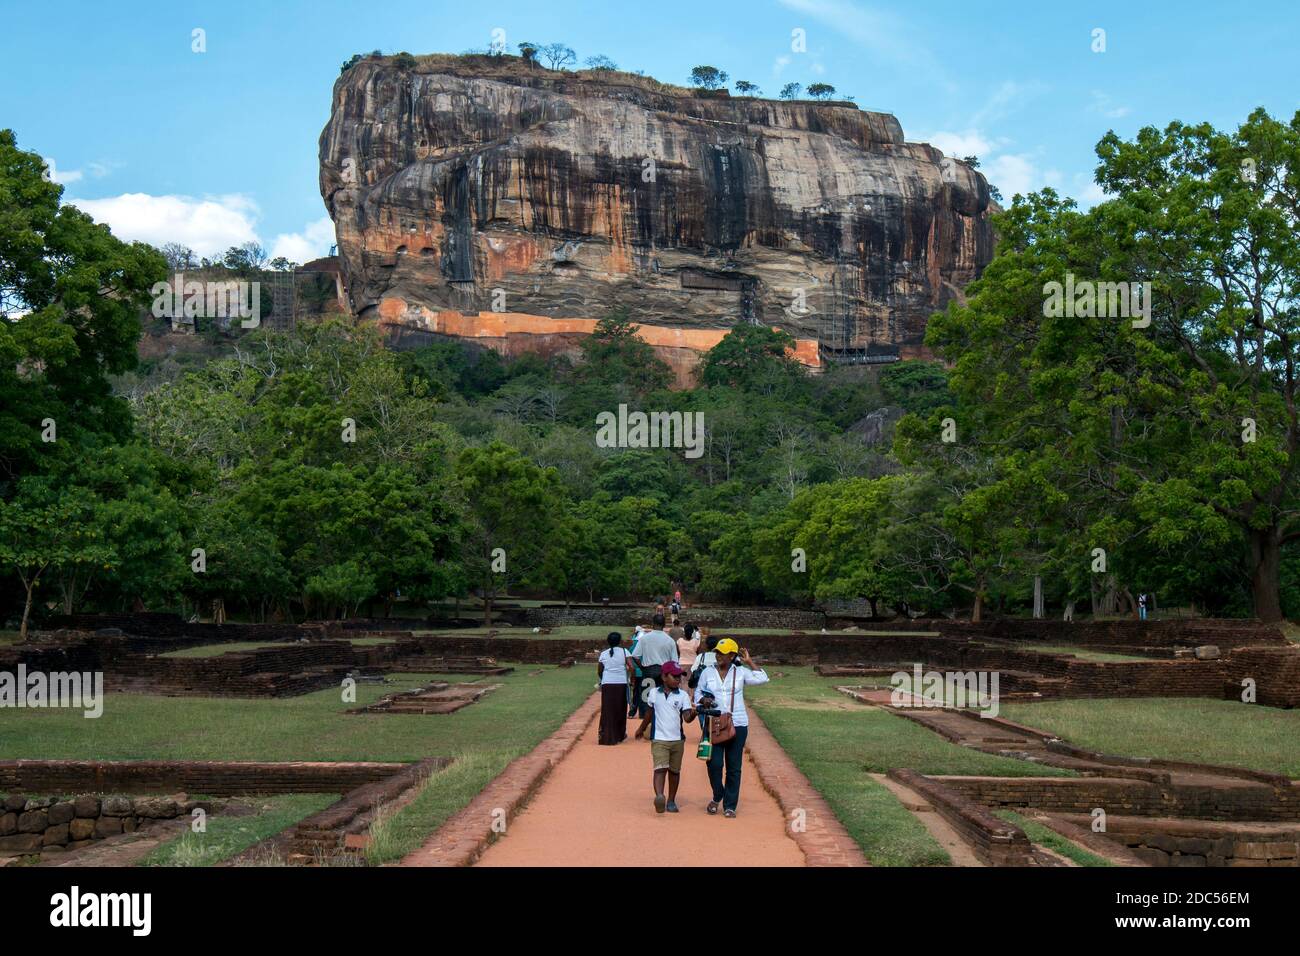 Visitors to Sigiriya Rock Fortress in Sri Lanka walk through the Royal Gardens which were elaborately designed stone and brick structures. Stock Photo